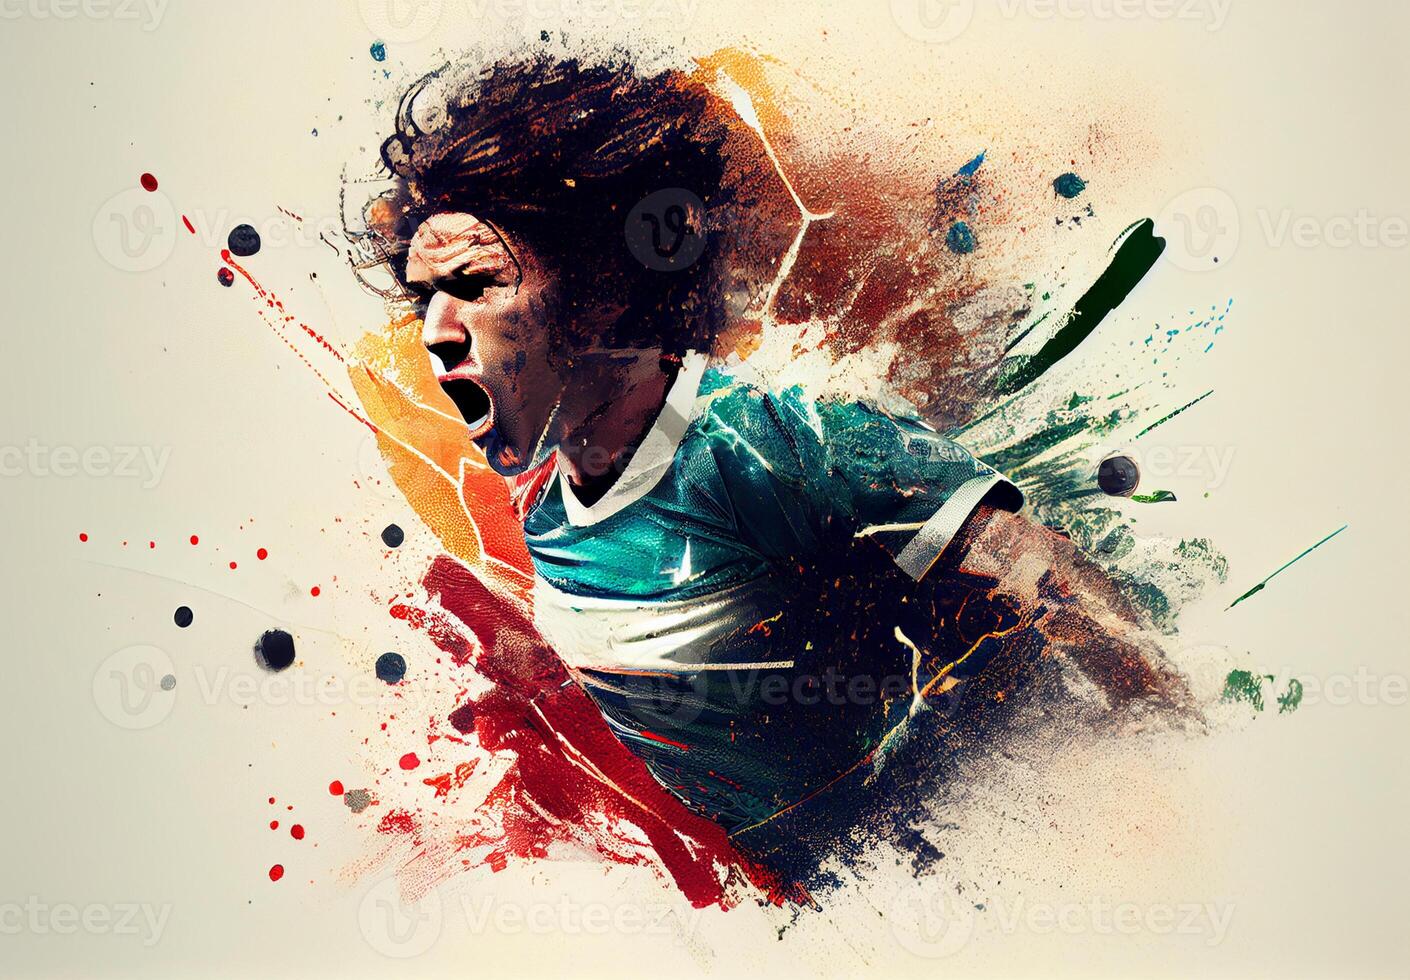 Abstract sports poster soccer player hitting the ball - image photo